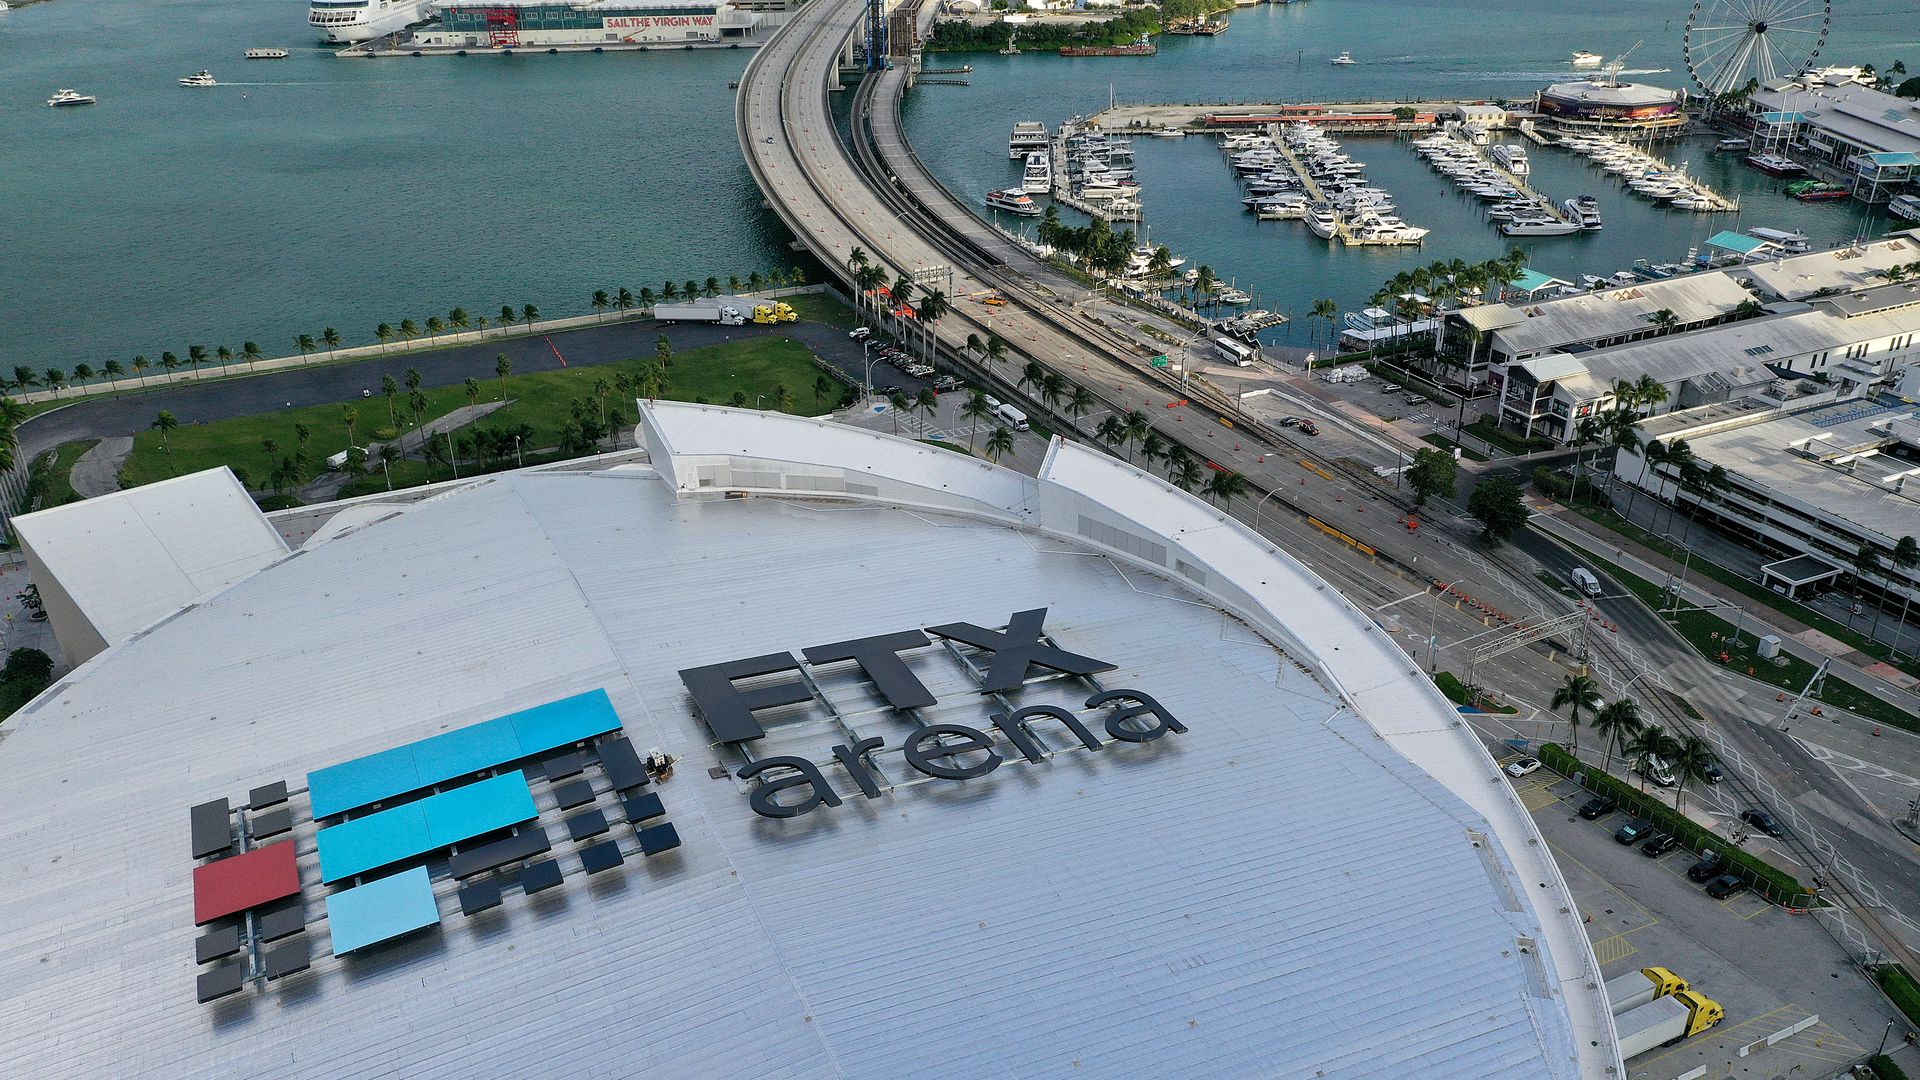 An aerial view of FTX Arena, where the Miami Heat play, shows FTX signage on the roof of the downtown Miami stadium.